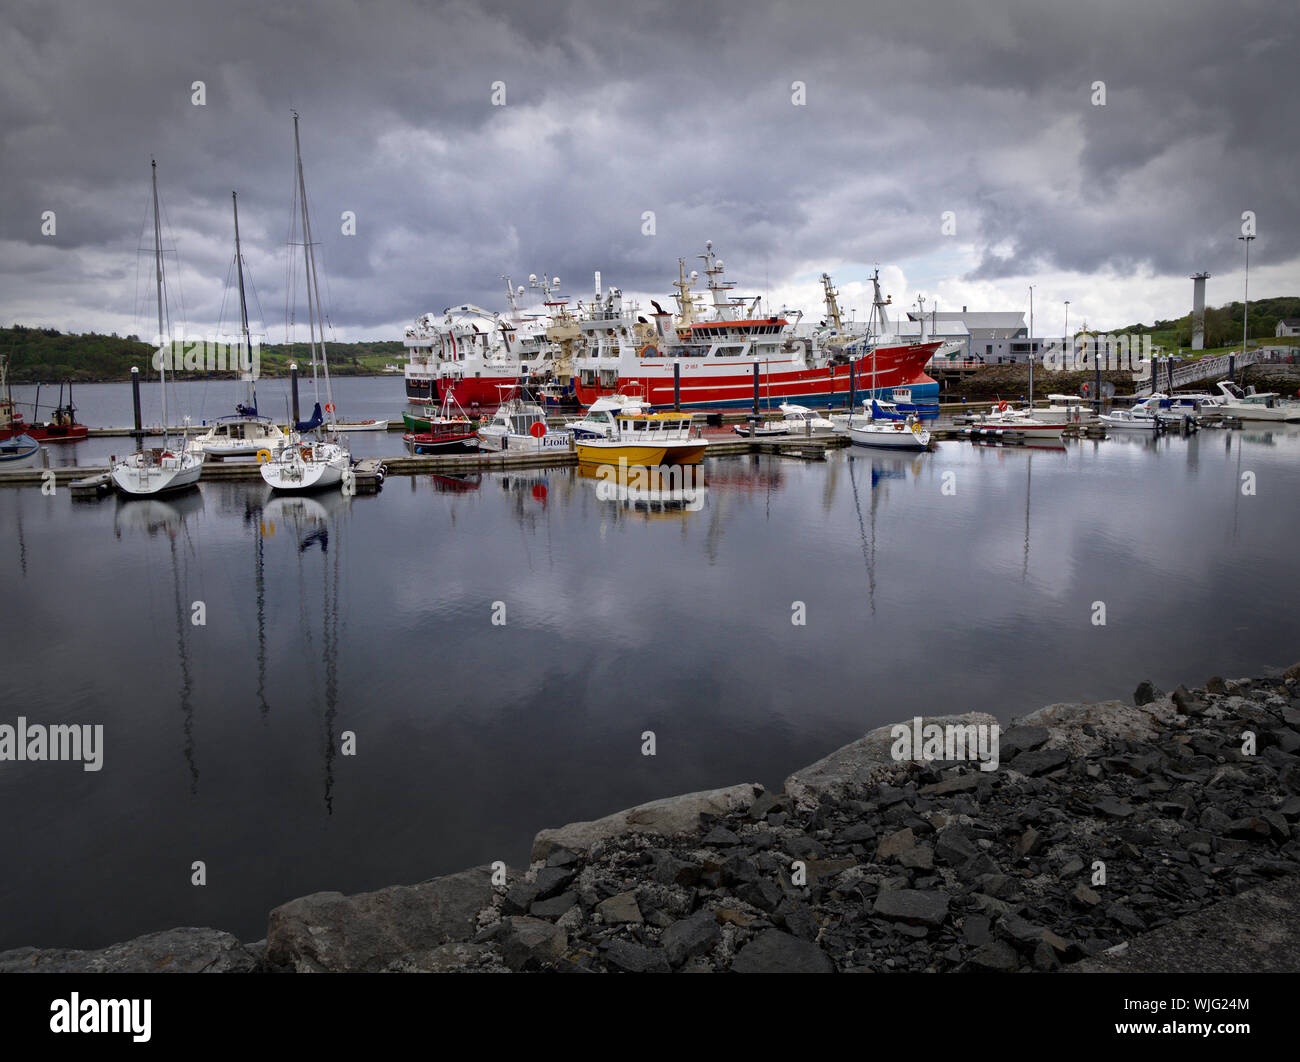 Killybegs, Co. Donegal, Ireland - May 19th, 2019 - Harbour with yachts, fishing vessels, overcast sky and stone quay in the foreground. Stock Photo